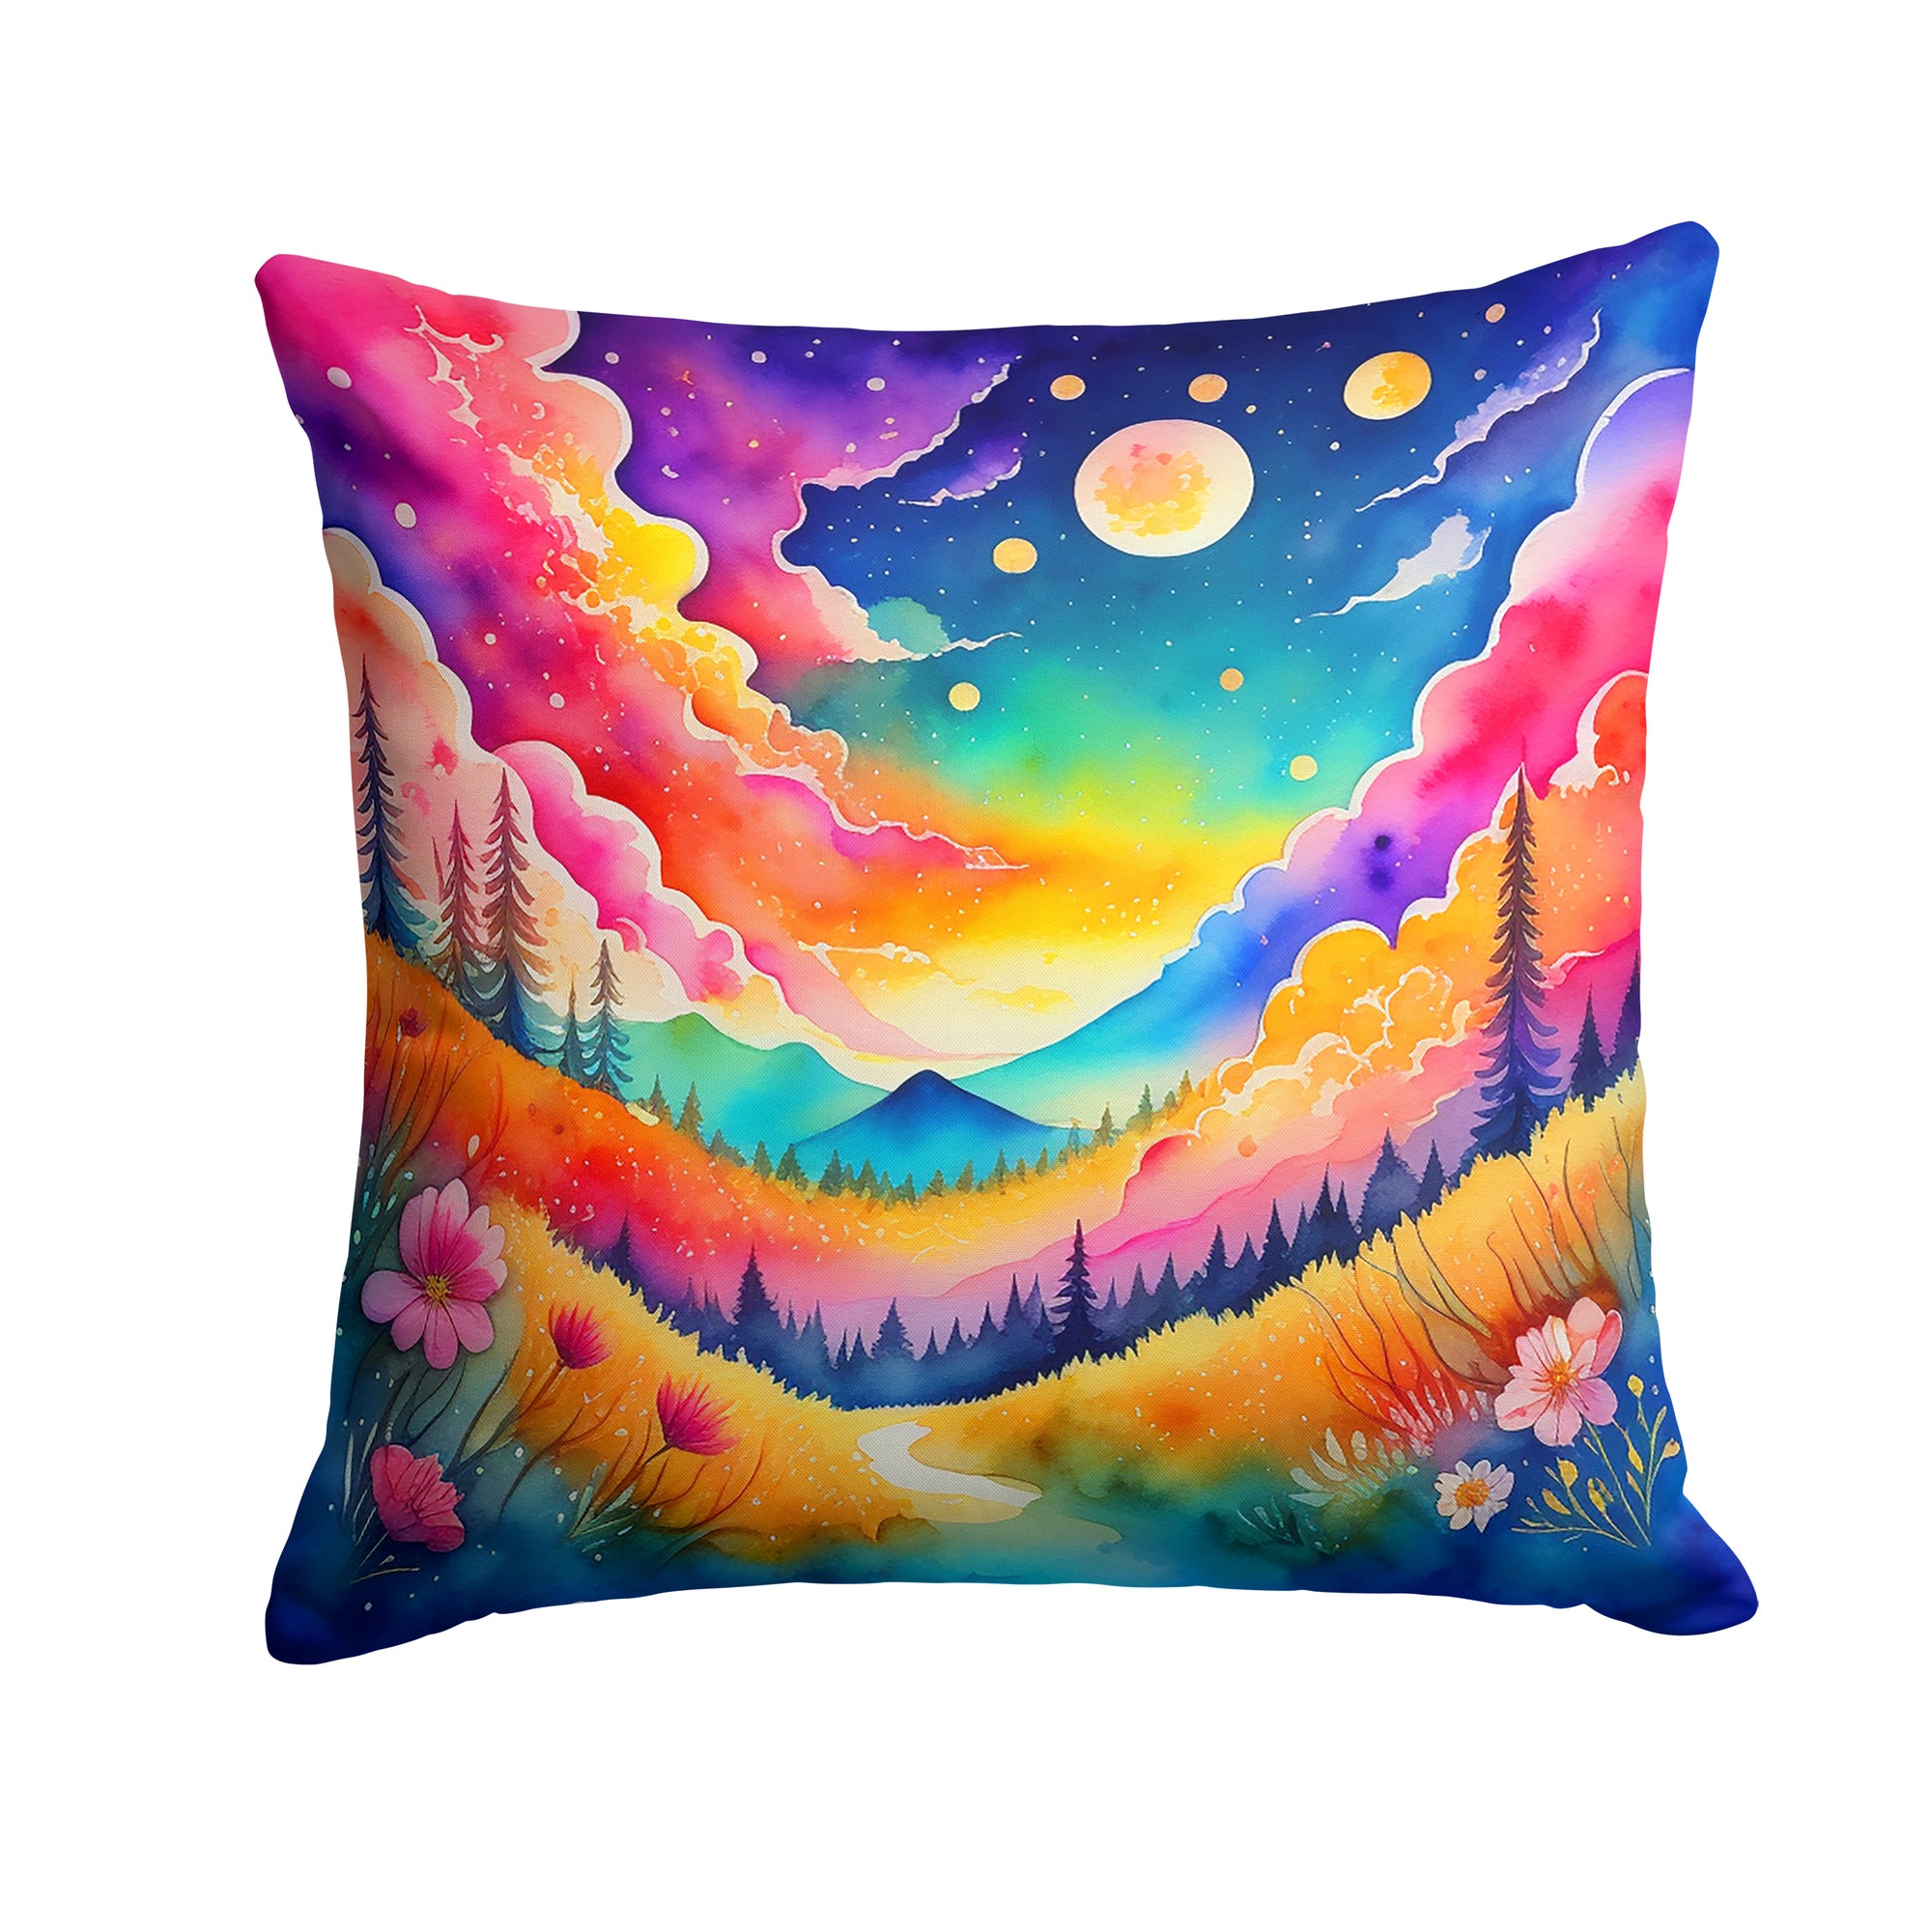 Buy this Colorful Stock, or gillyflower Fabric Decorative Pillow